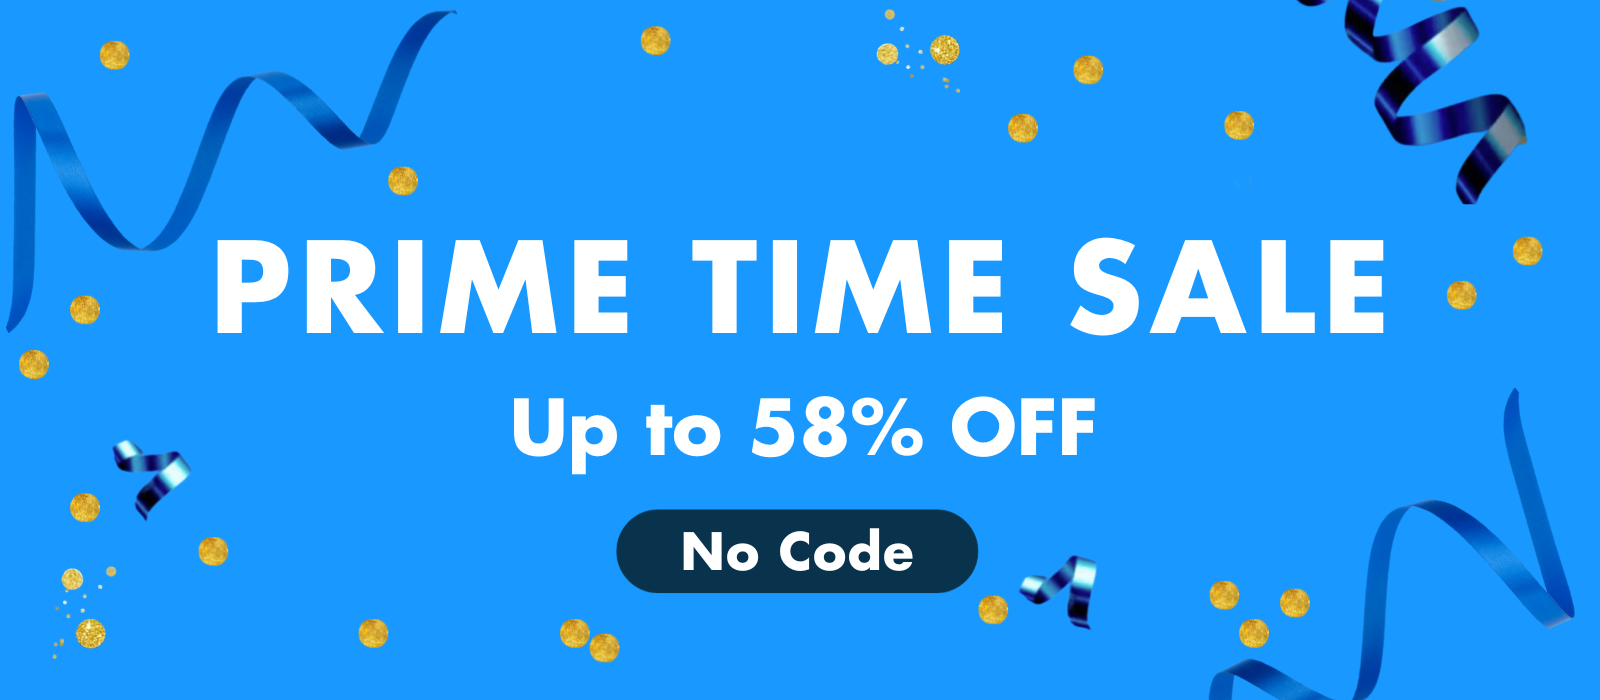 PRIME TIME SALE 
Up to 58% OFF
no code needed